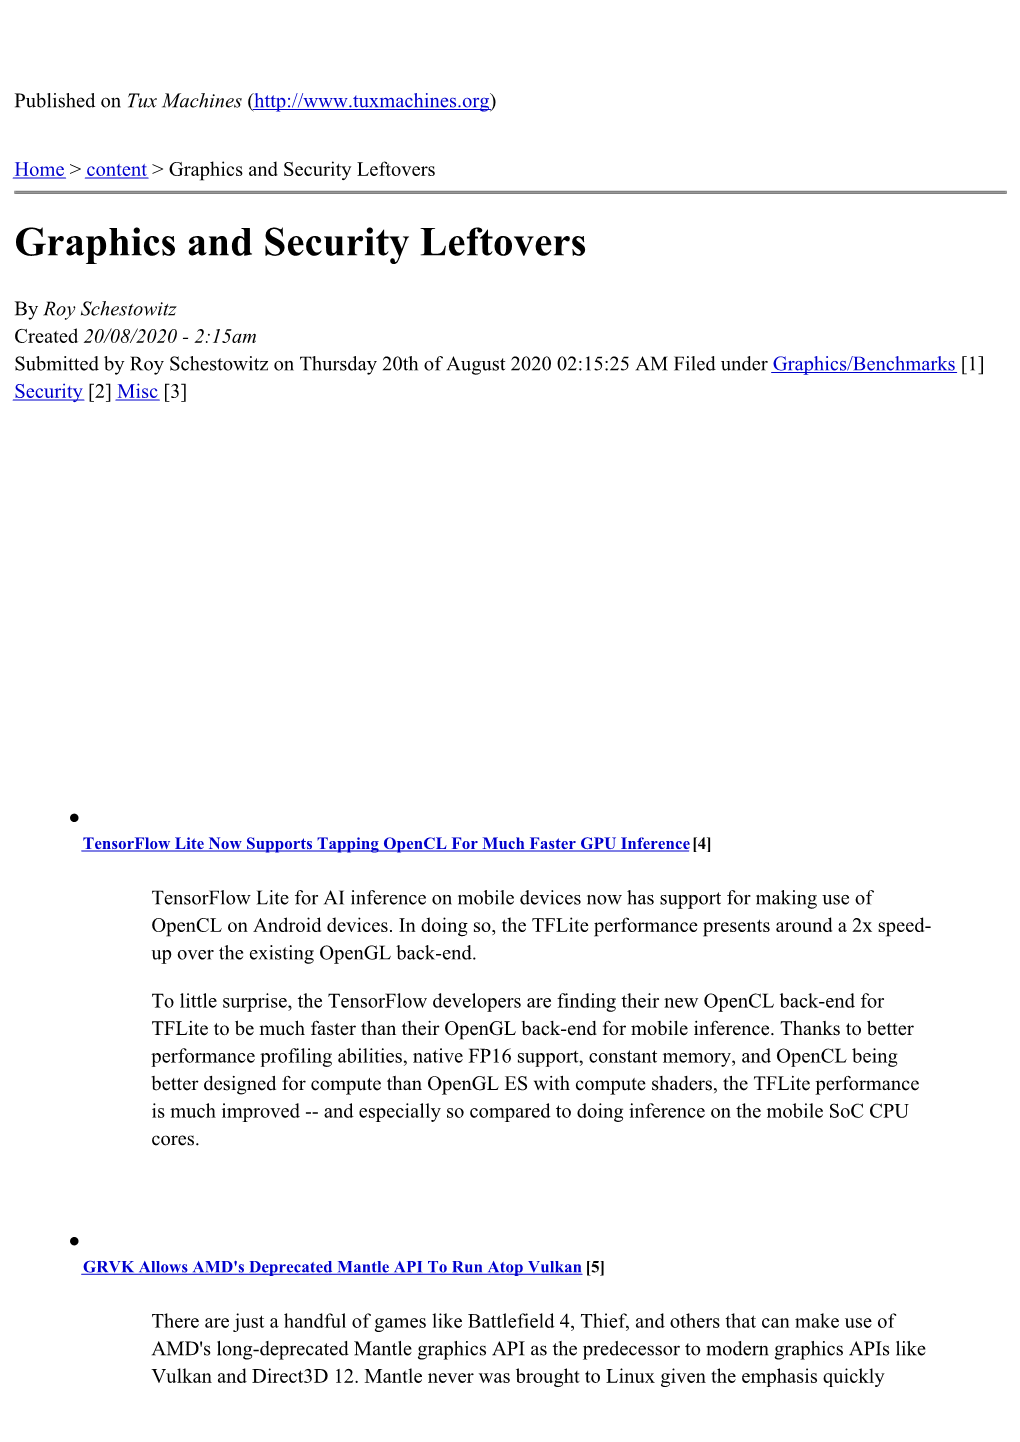 Graphics and Security Leftovers